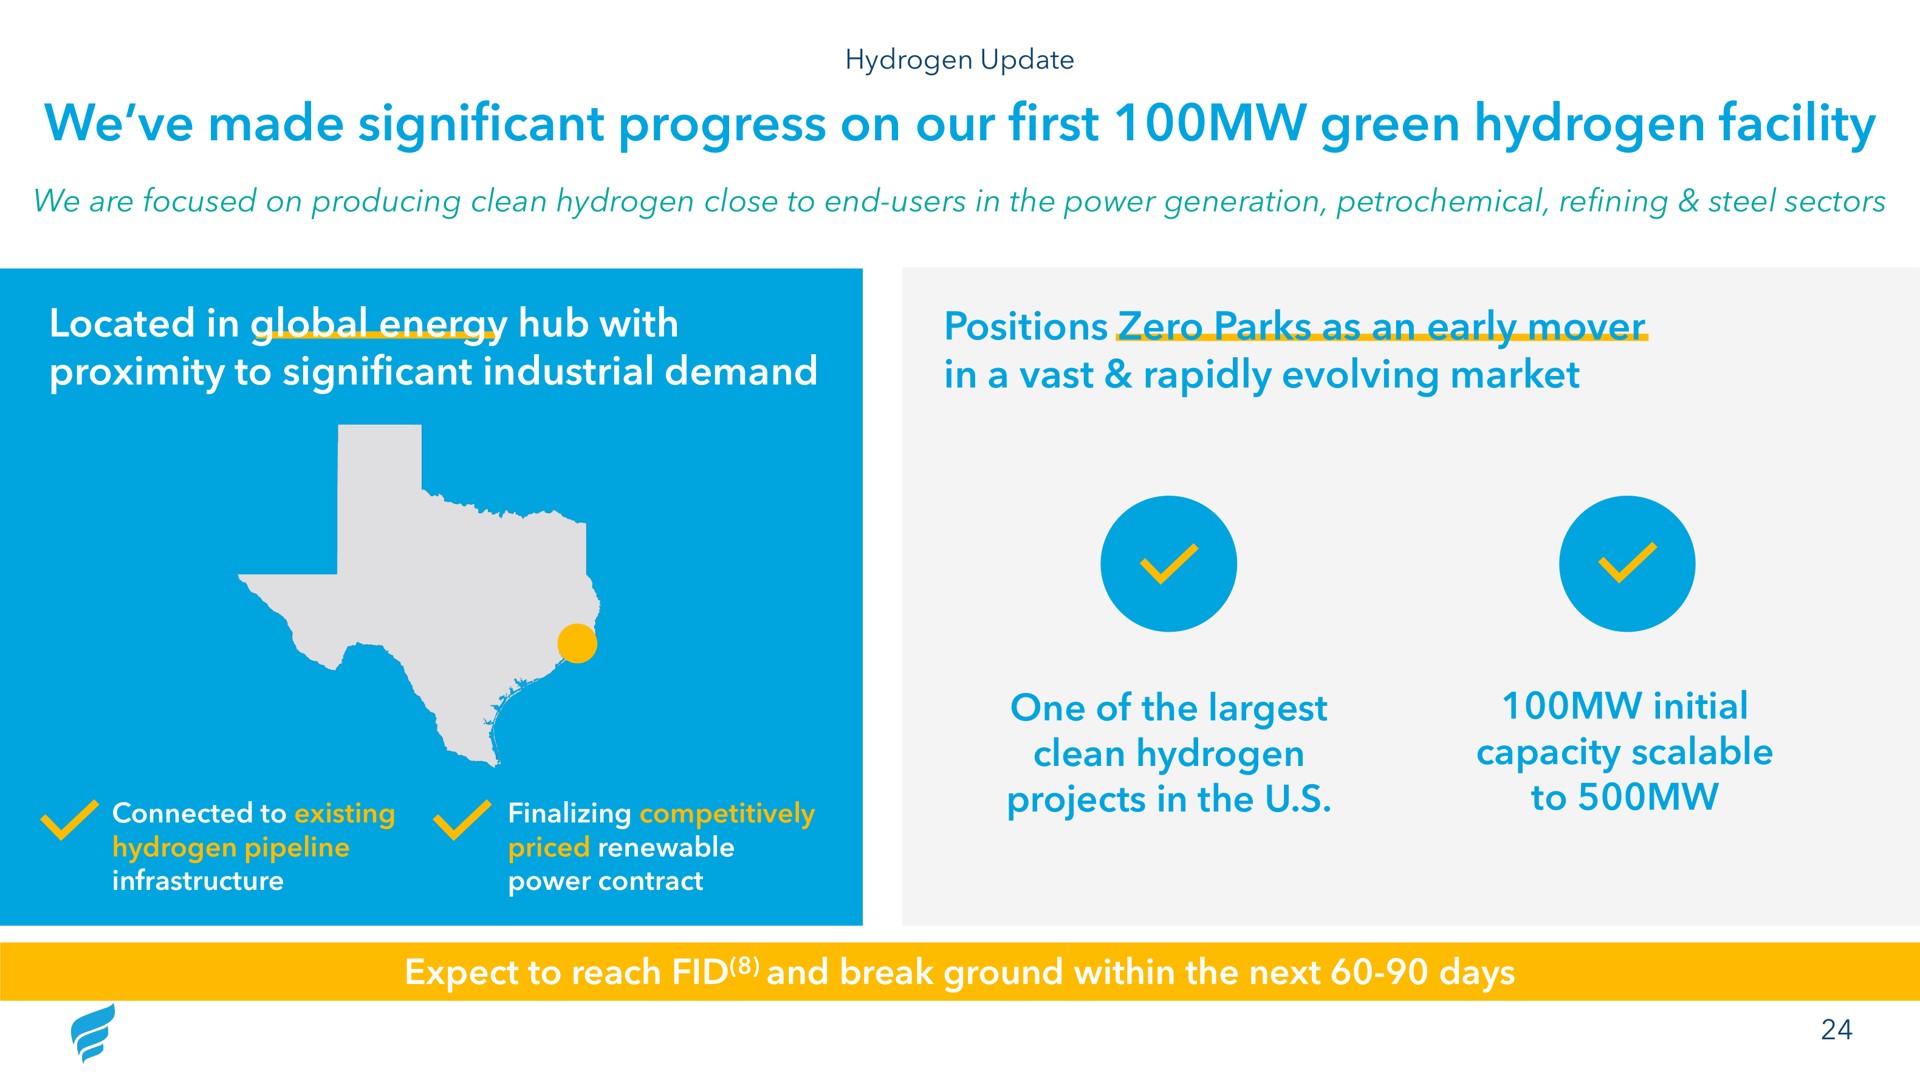 we made significant progress on our first green hydrogen facility located in global energy hub with proximity to significant industrial demand positions zero parks as an early mover in a vast rapidly evolving market one of the clean hydrogen projects in the initial capacity scalable to | NewFortress Energy